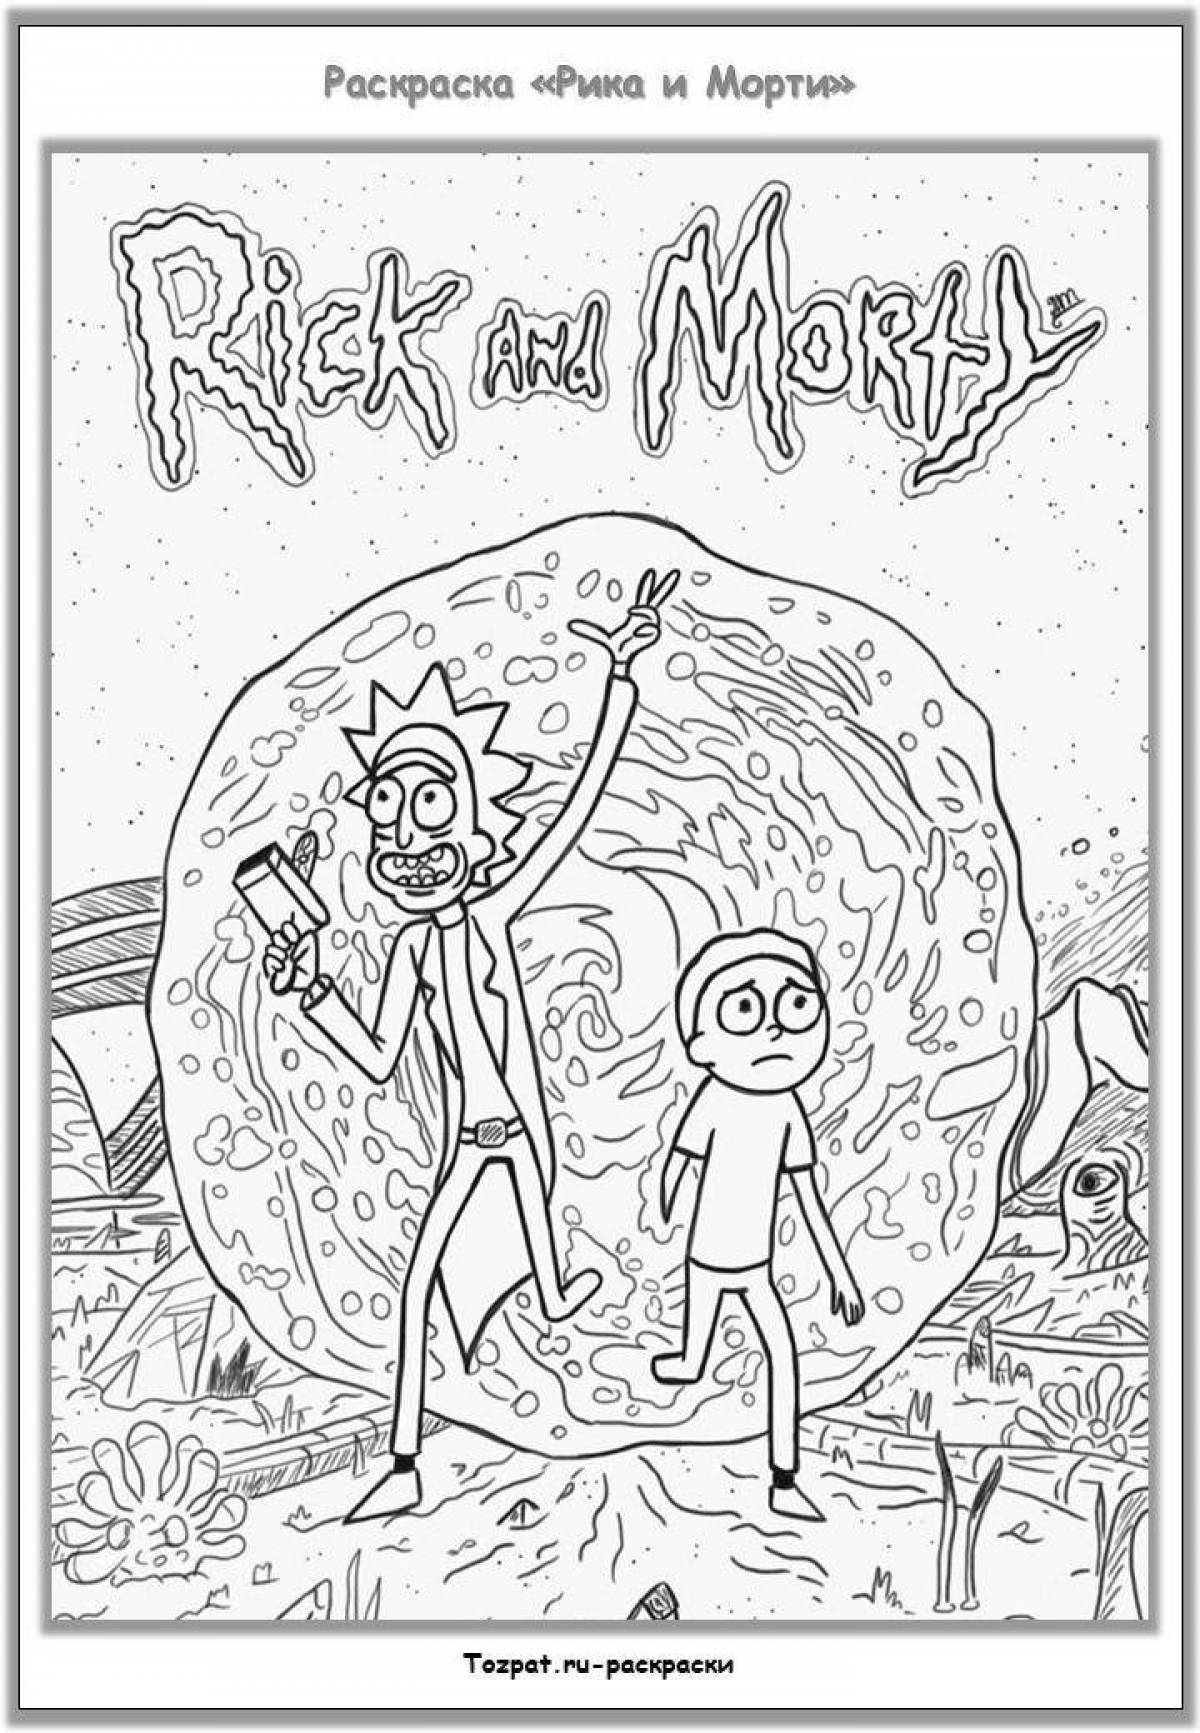 Colorful-romp rick and morty by numbers